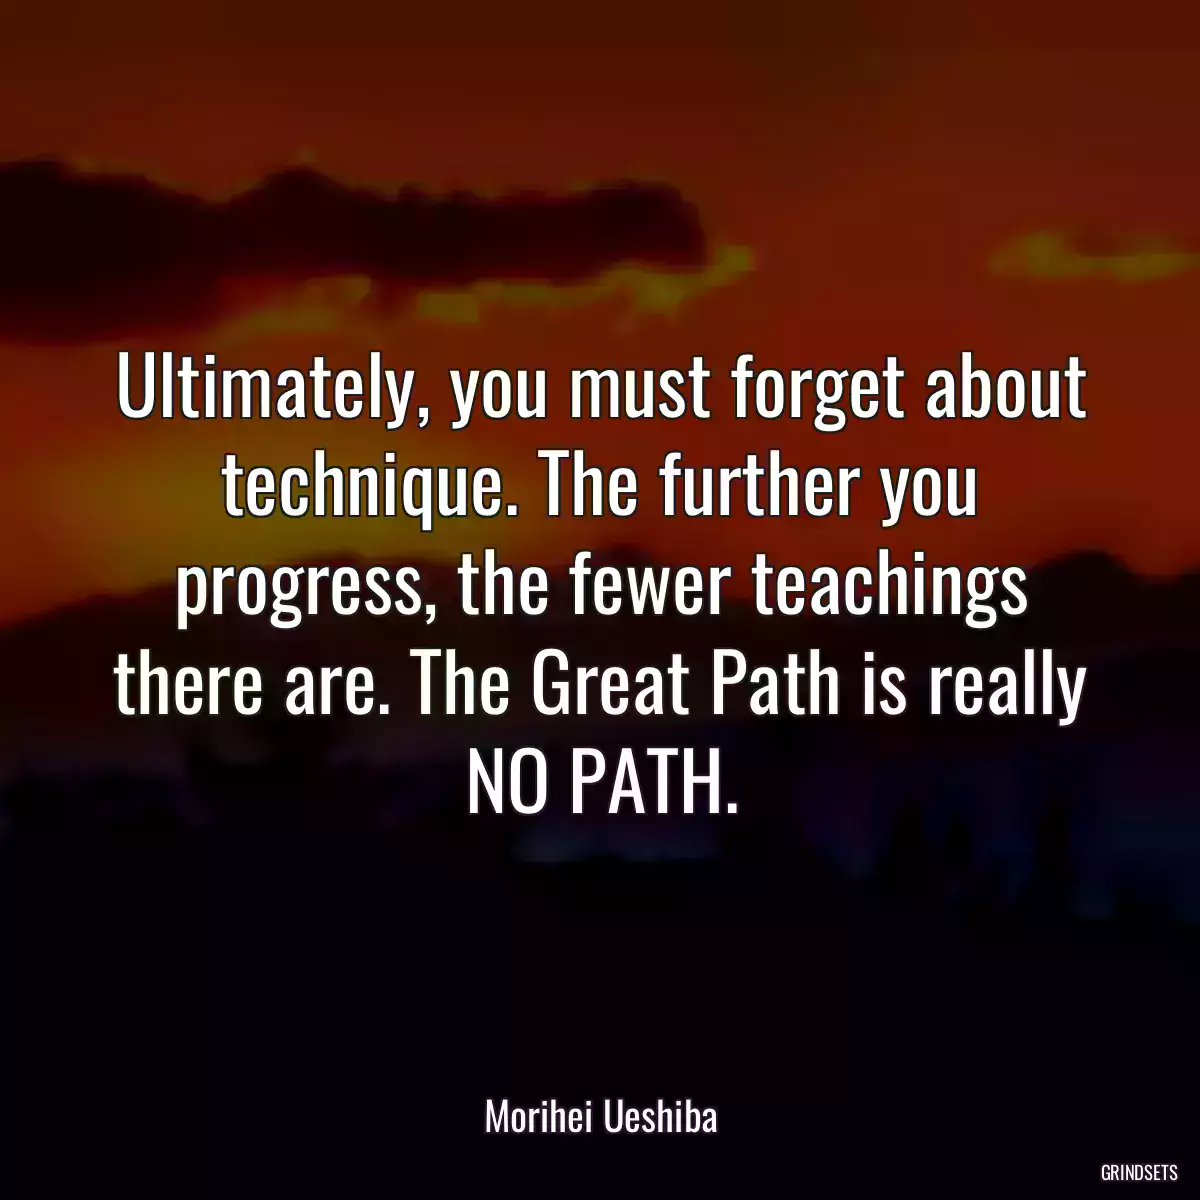 Ultimately, you must forget about technique. The further you progress, the fewer teachings there are. The Great Path is really NO PATH.